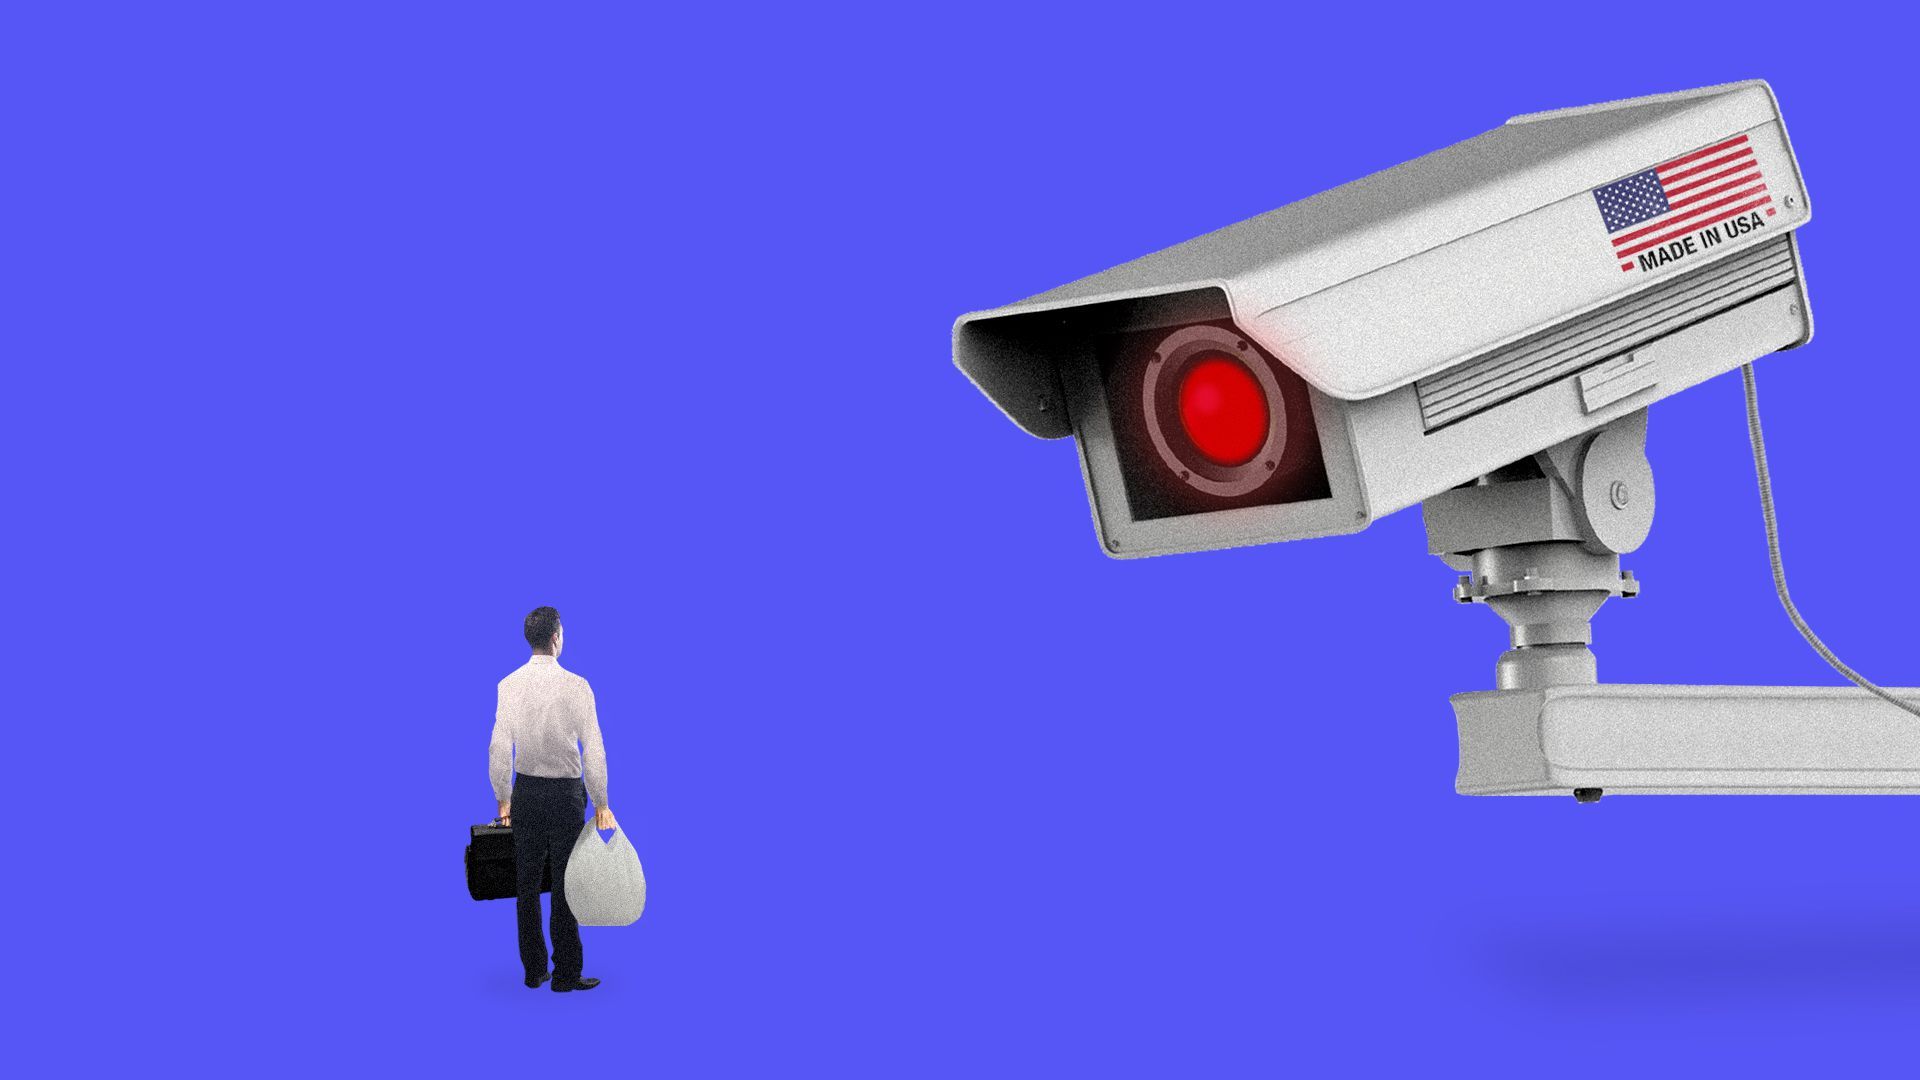 Illustration of surveillance camera with U.S. flag on it, peering down on human being 